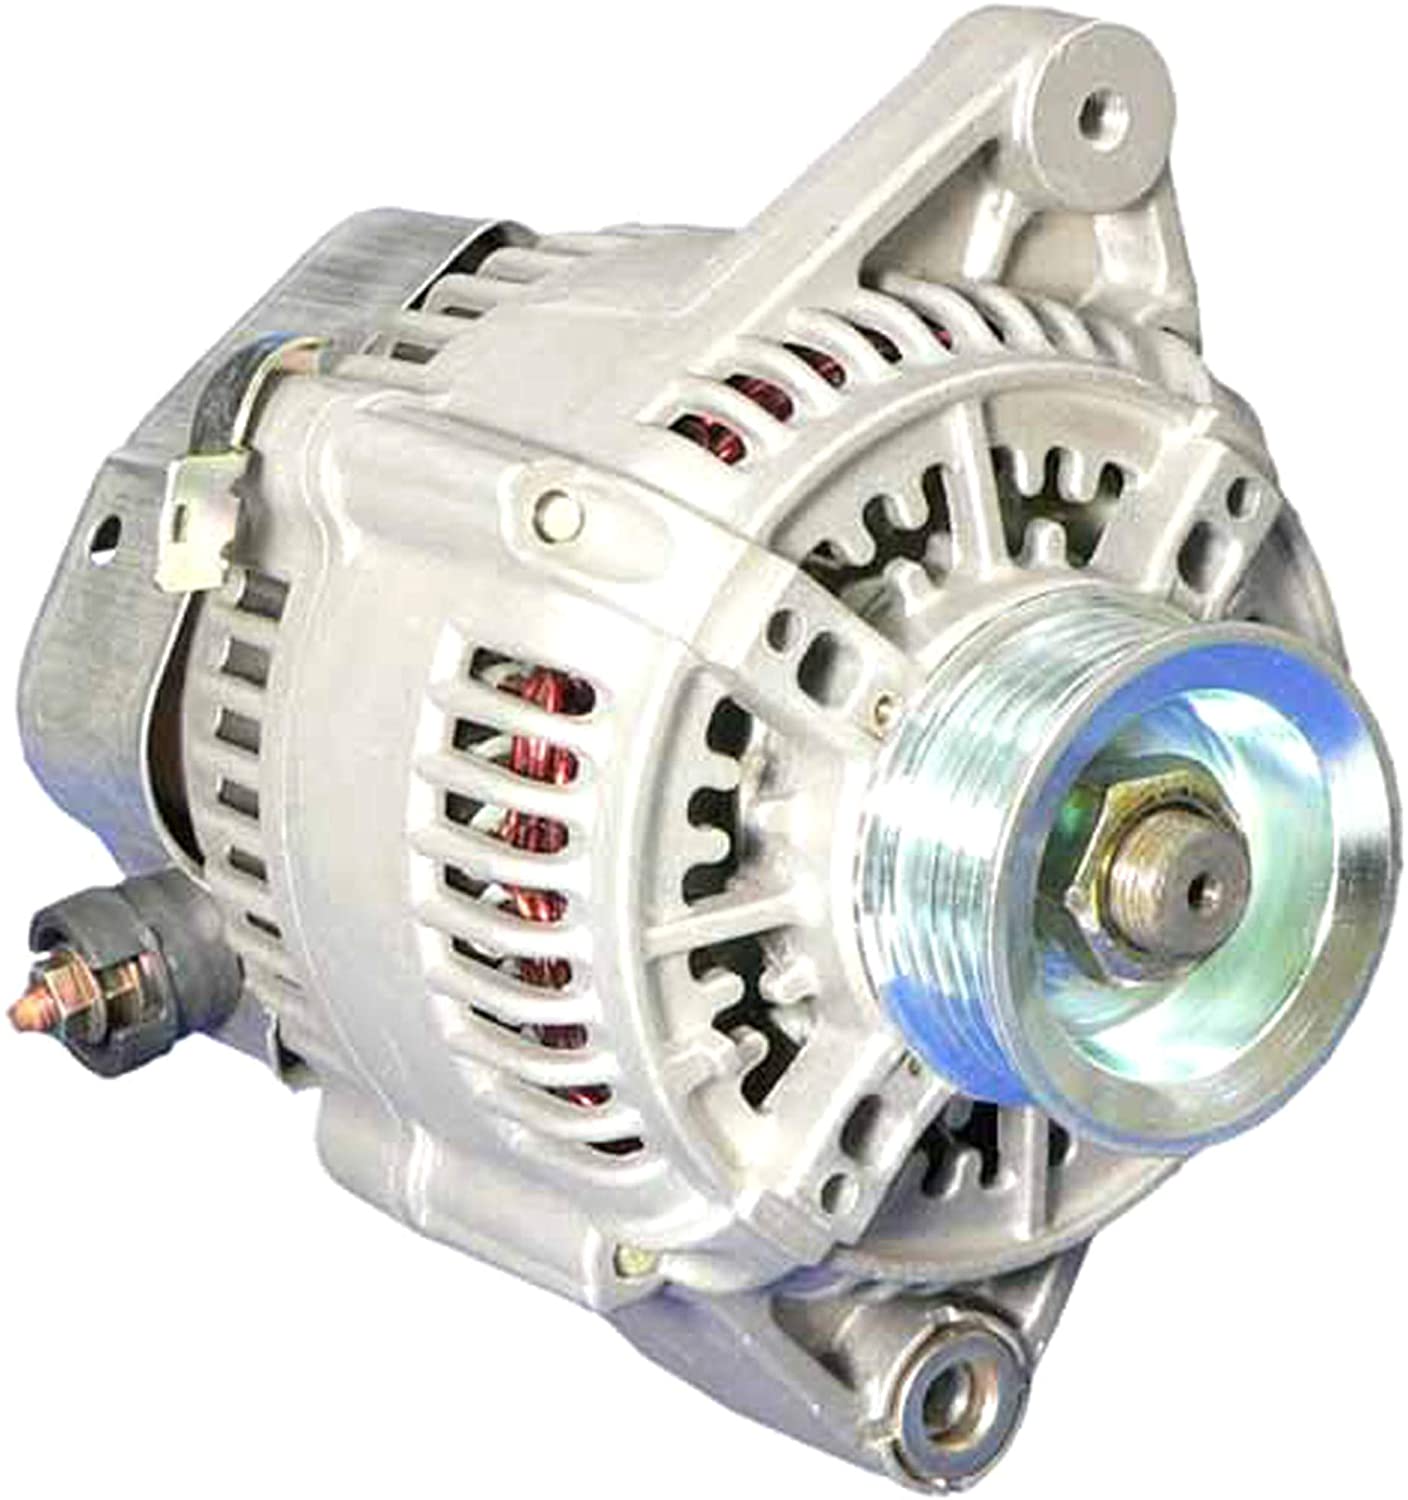 DB Electrical AND0187 Alternator Compatible With/Replacement For 2.2L 2.2 Toyota Camry 1997-2001 13754, Solara 1999-2001 111468 101211-9510 101211-9580 400-52125 27060-03060 13754